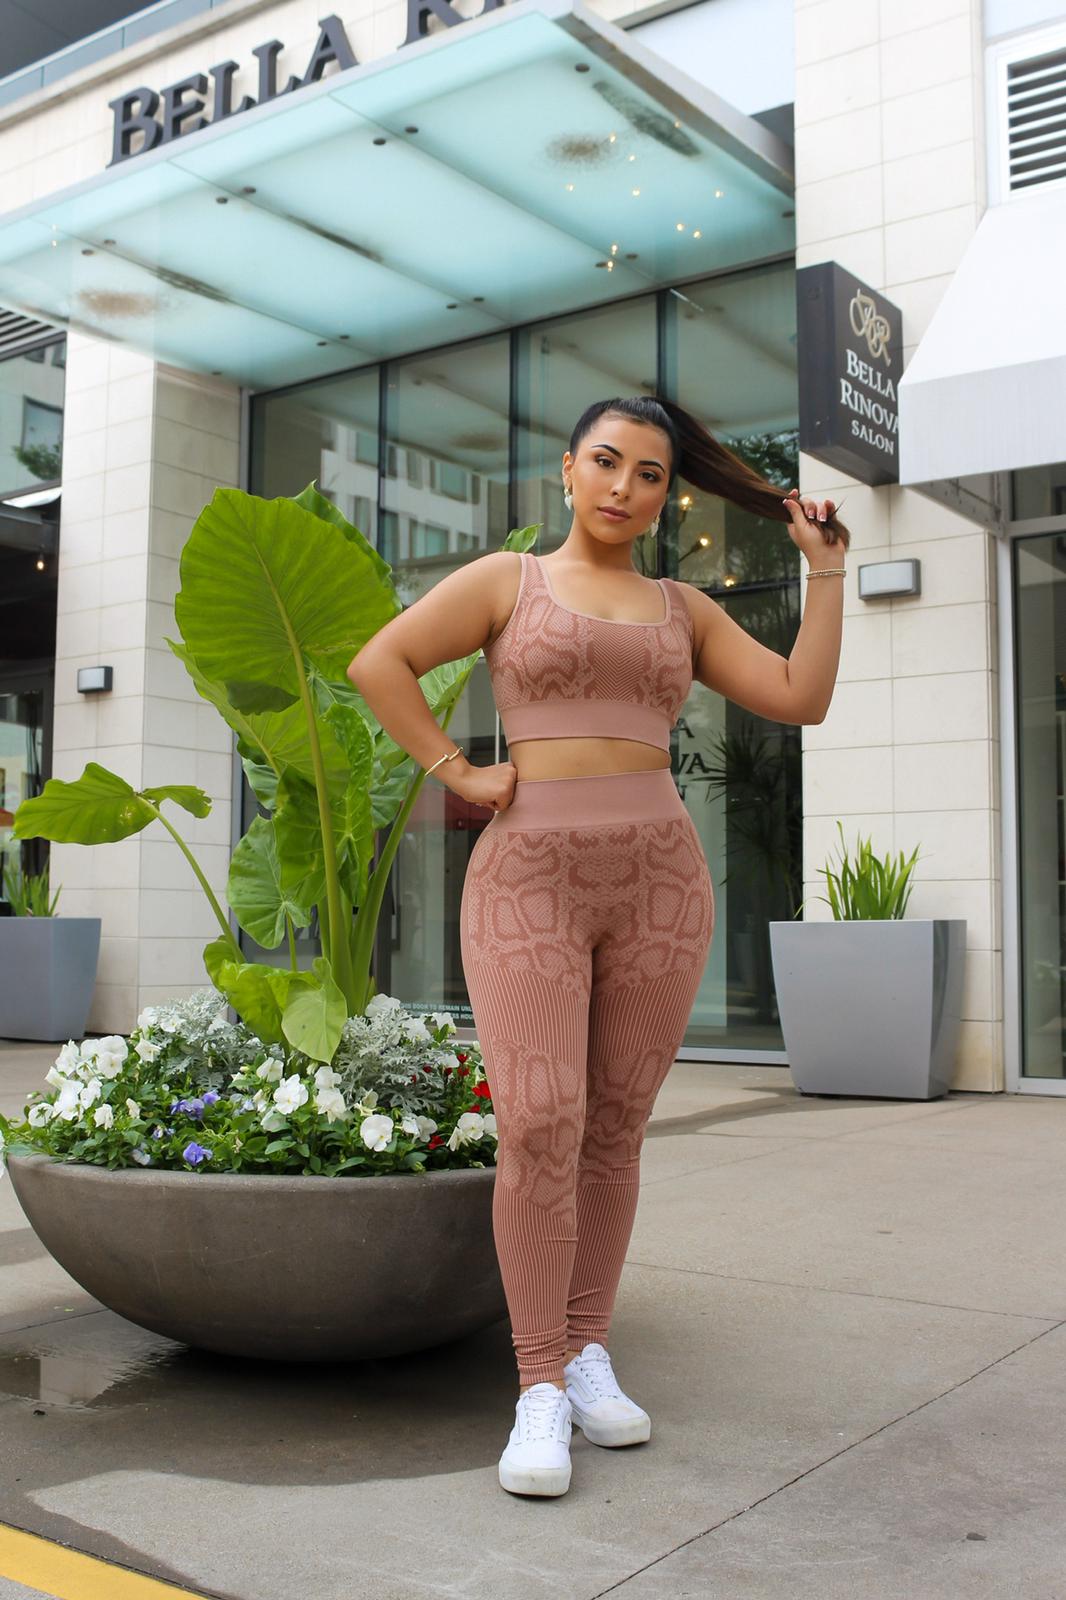 "Make a Statement with Our 2 Piece Nude Snake Print Active Wear Set"